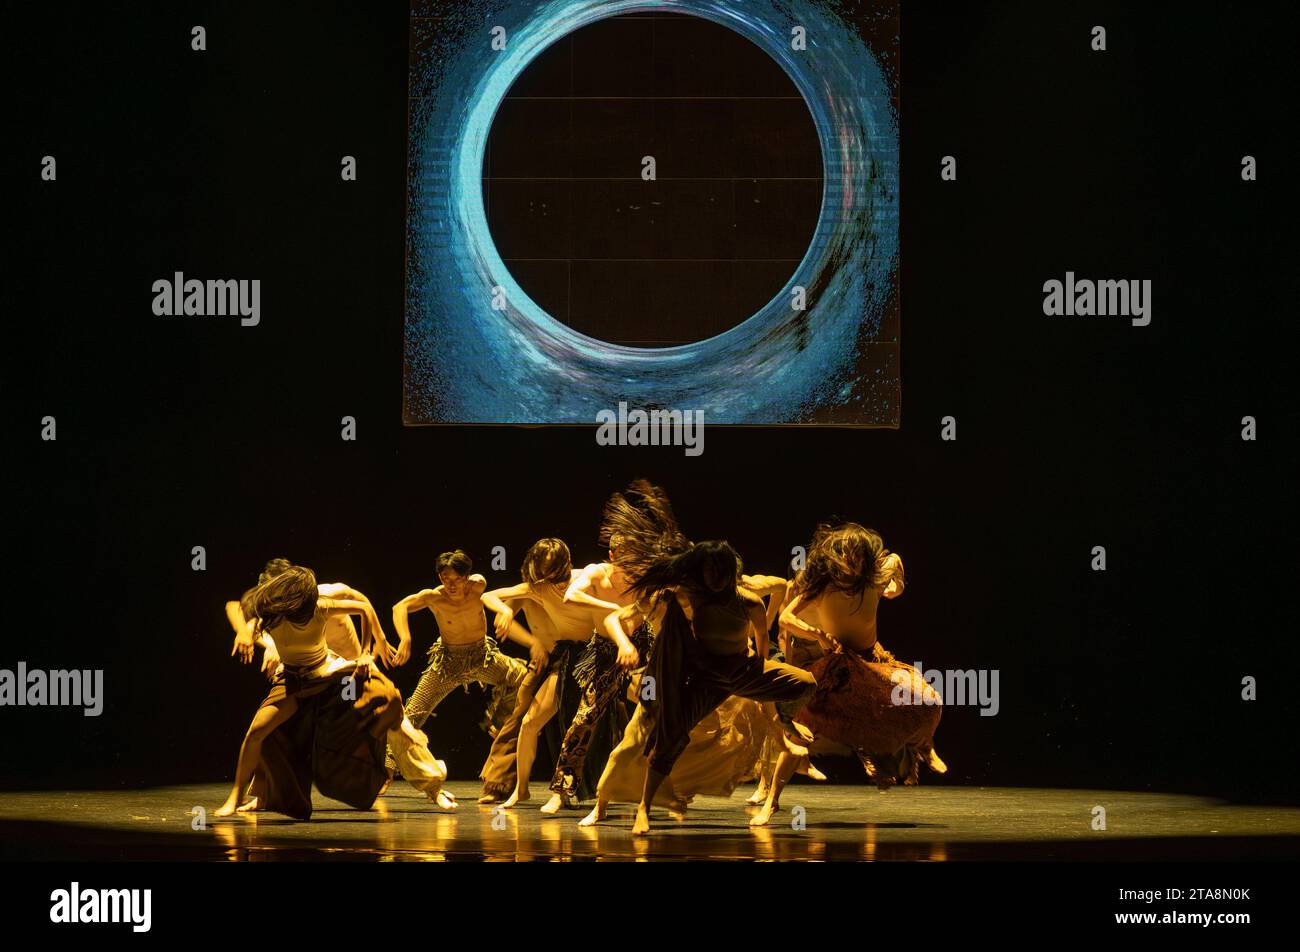 London, UK. 29th Nov, 2023. Cloud Gate Dance Theatre of Taiwan presents Lunar Halo at Sadlers Wells from 30 Nov - 2 Dec 2023. Cloud Gate Artistic Director CHENG Tsung-lung first observed a lunar halo - a sparkling ring around the moon - in the sky over Iceland, said to predict an impending storm and, on a deeper level, forebodes a time of considerable change. Working with the Icelandic band Sigur Rós, CHENG explores the changes shaping our world, particularly our increasing reliance on communicating through new technology. Credit: Malcolm Park/Alamy Live News Stock Photo